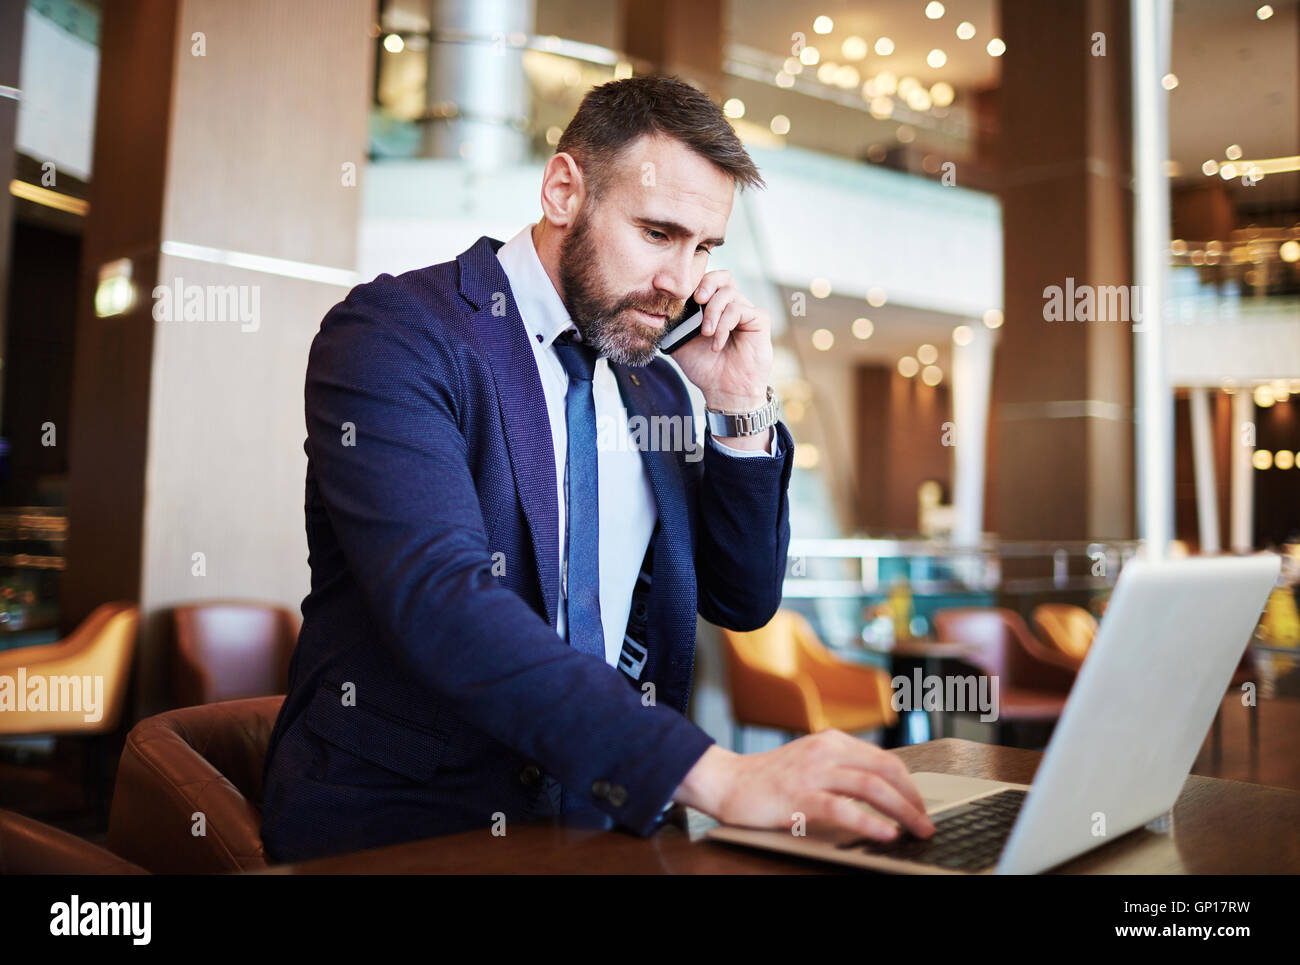 Business trip working Stock Photo